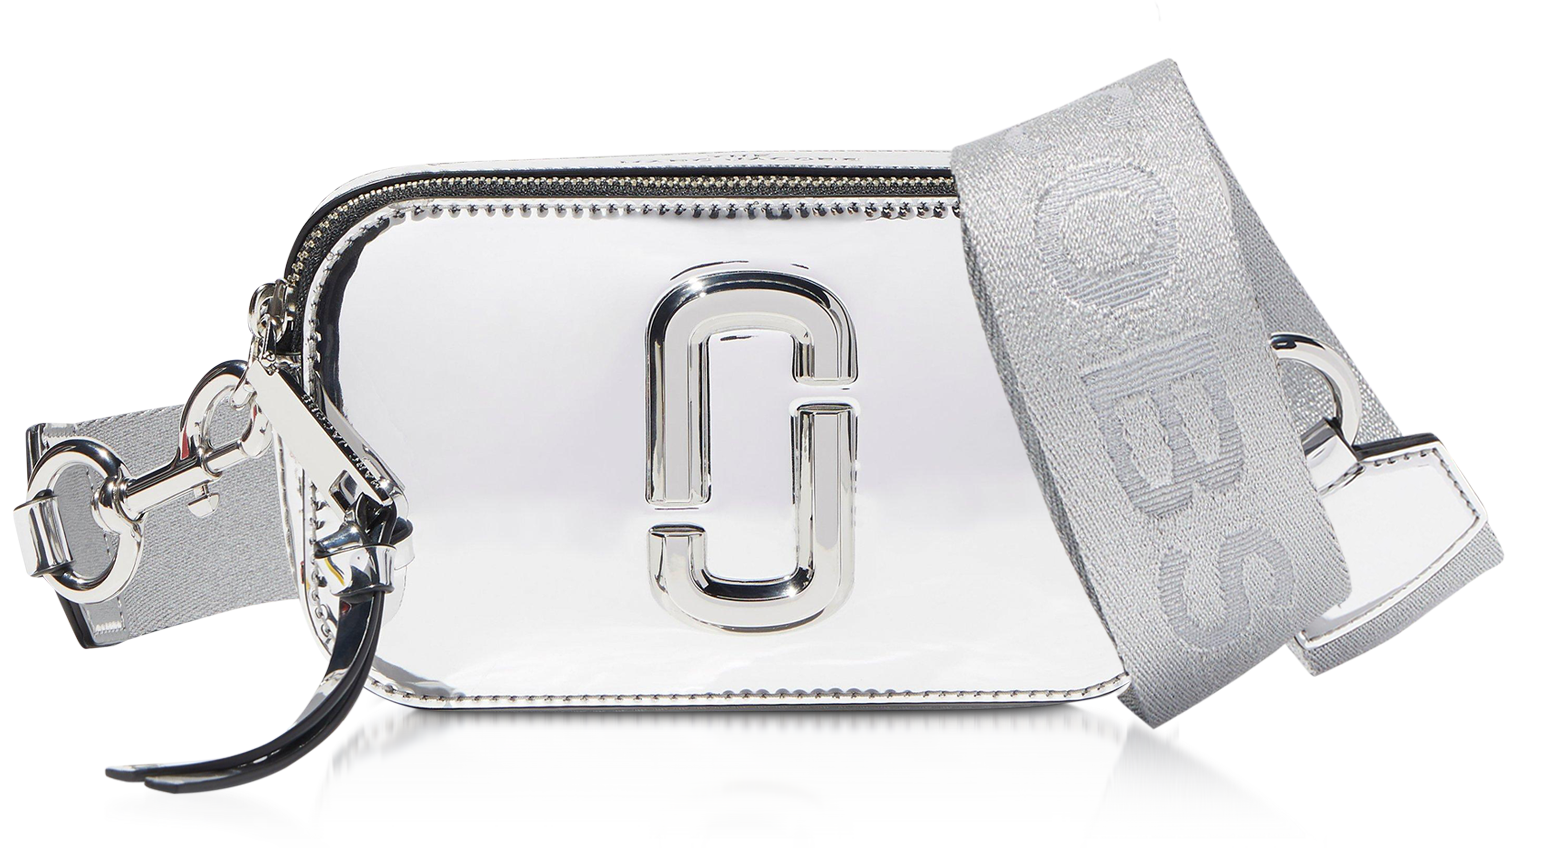 Marc Jacobs Silver The Snapshot Mirrored PVC Camera Bag at FORZIERI